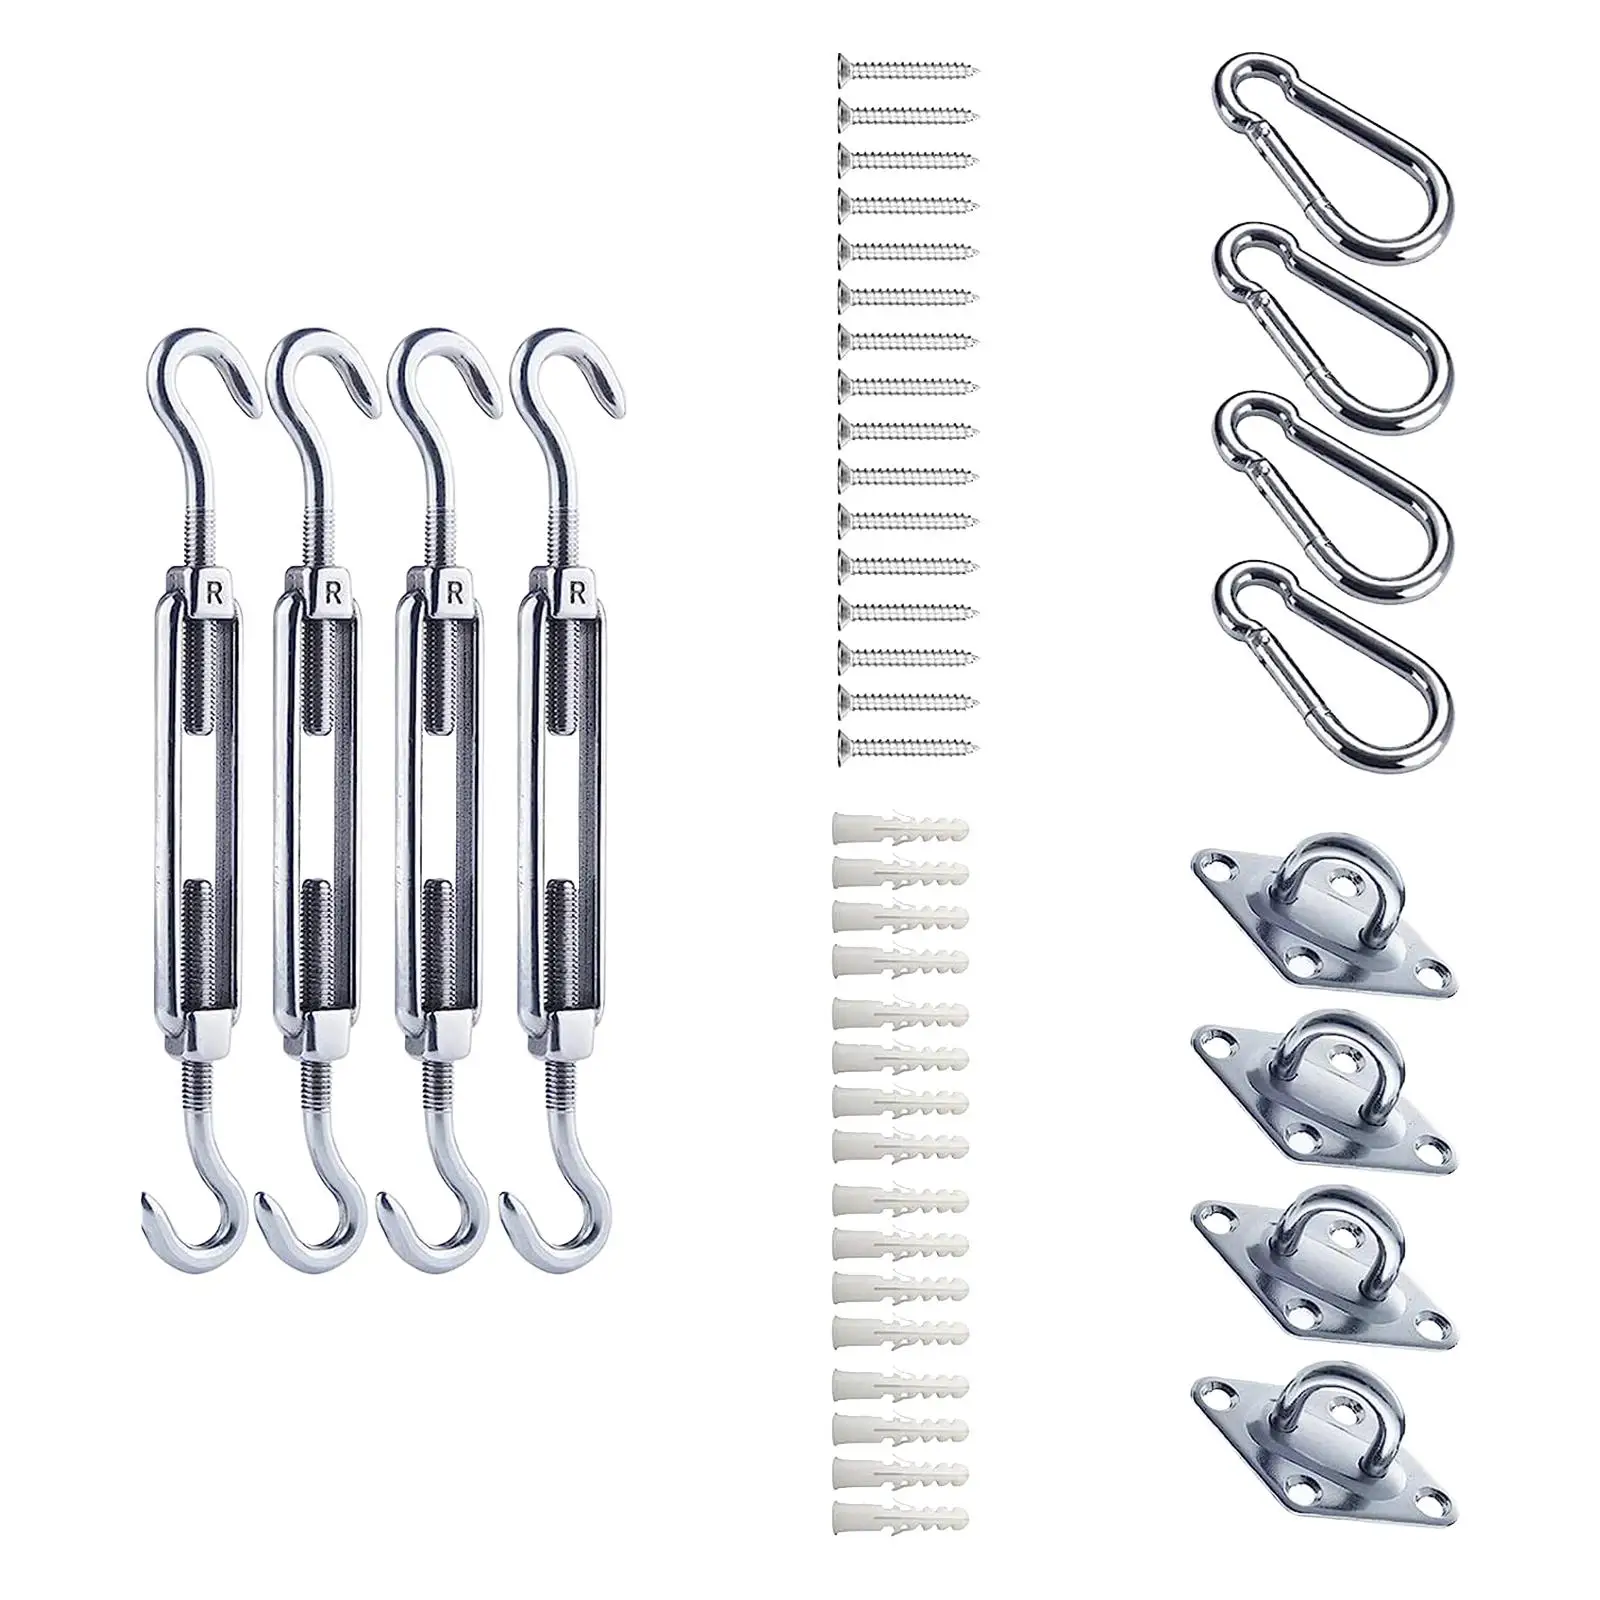 Awning Attachment Set Sunshades Sail Fixing Accessories Fittings Tool Installation Replacement Canopy Installation Kits for Lawn